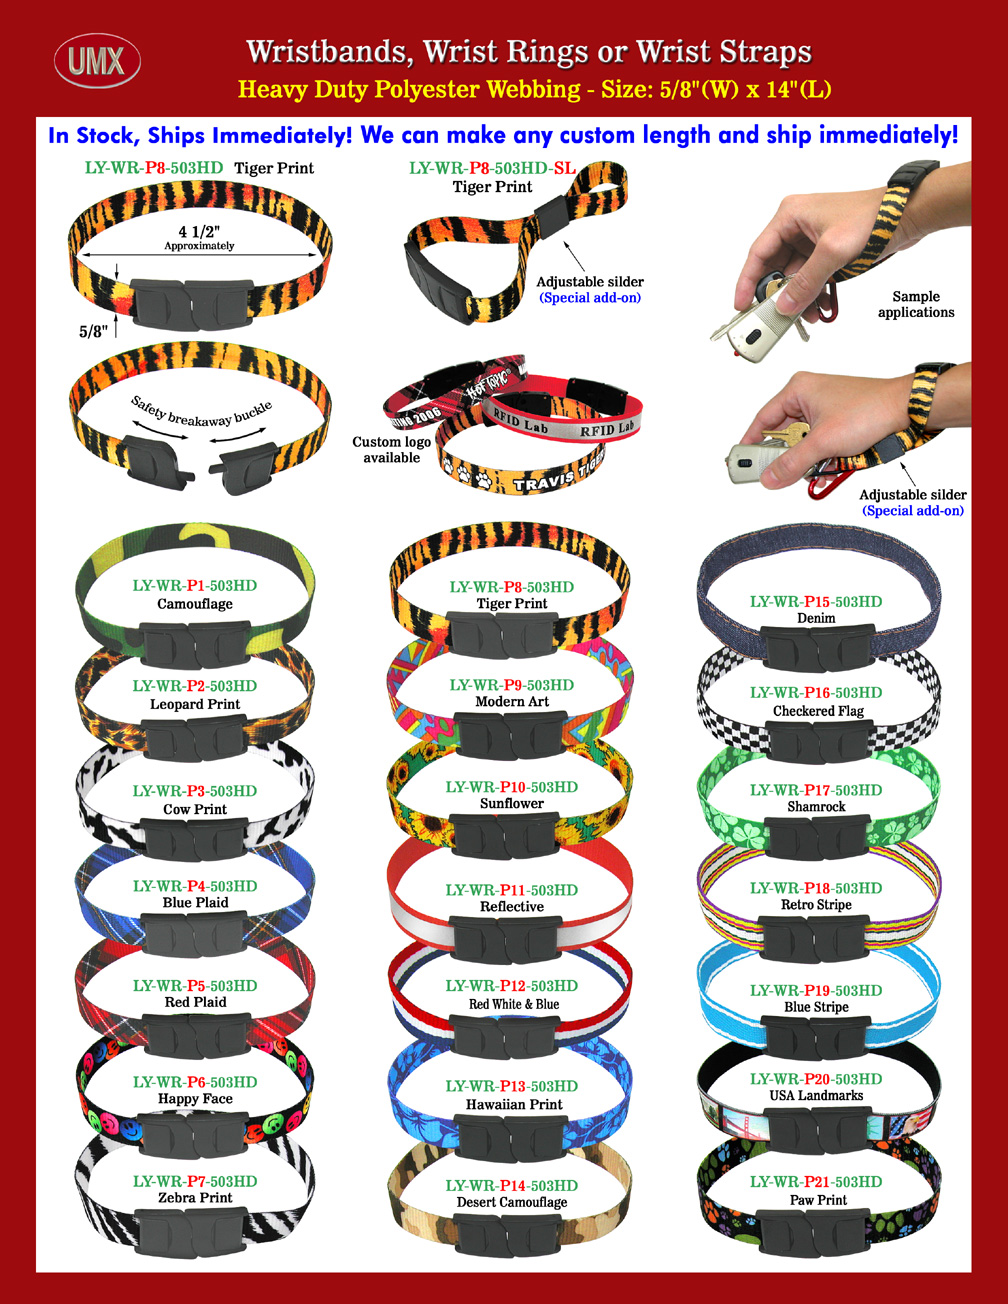 The unique and cool designed 5/8" pre-printed fabric wrist band lanyards are great for wrist wear and a variety of application.